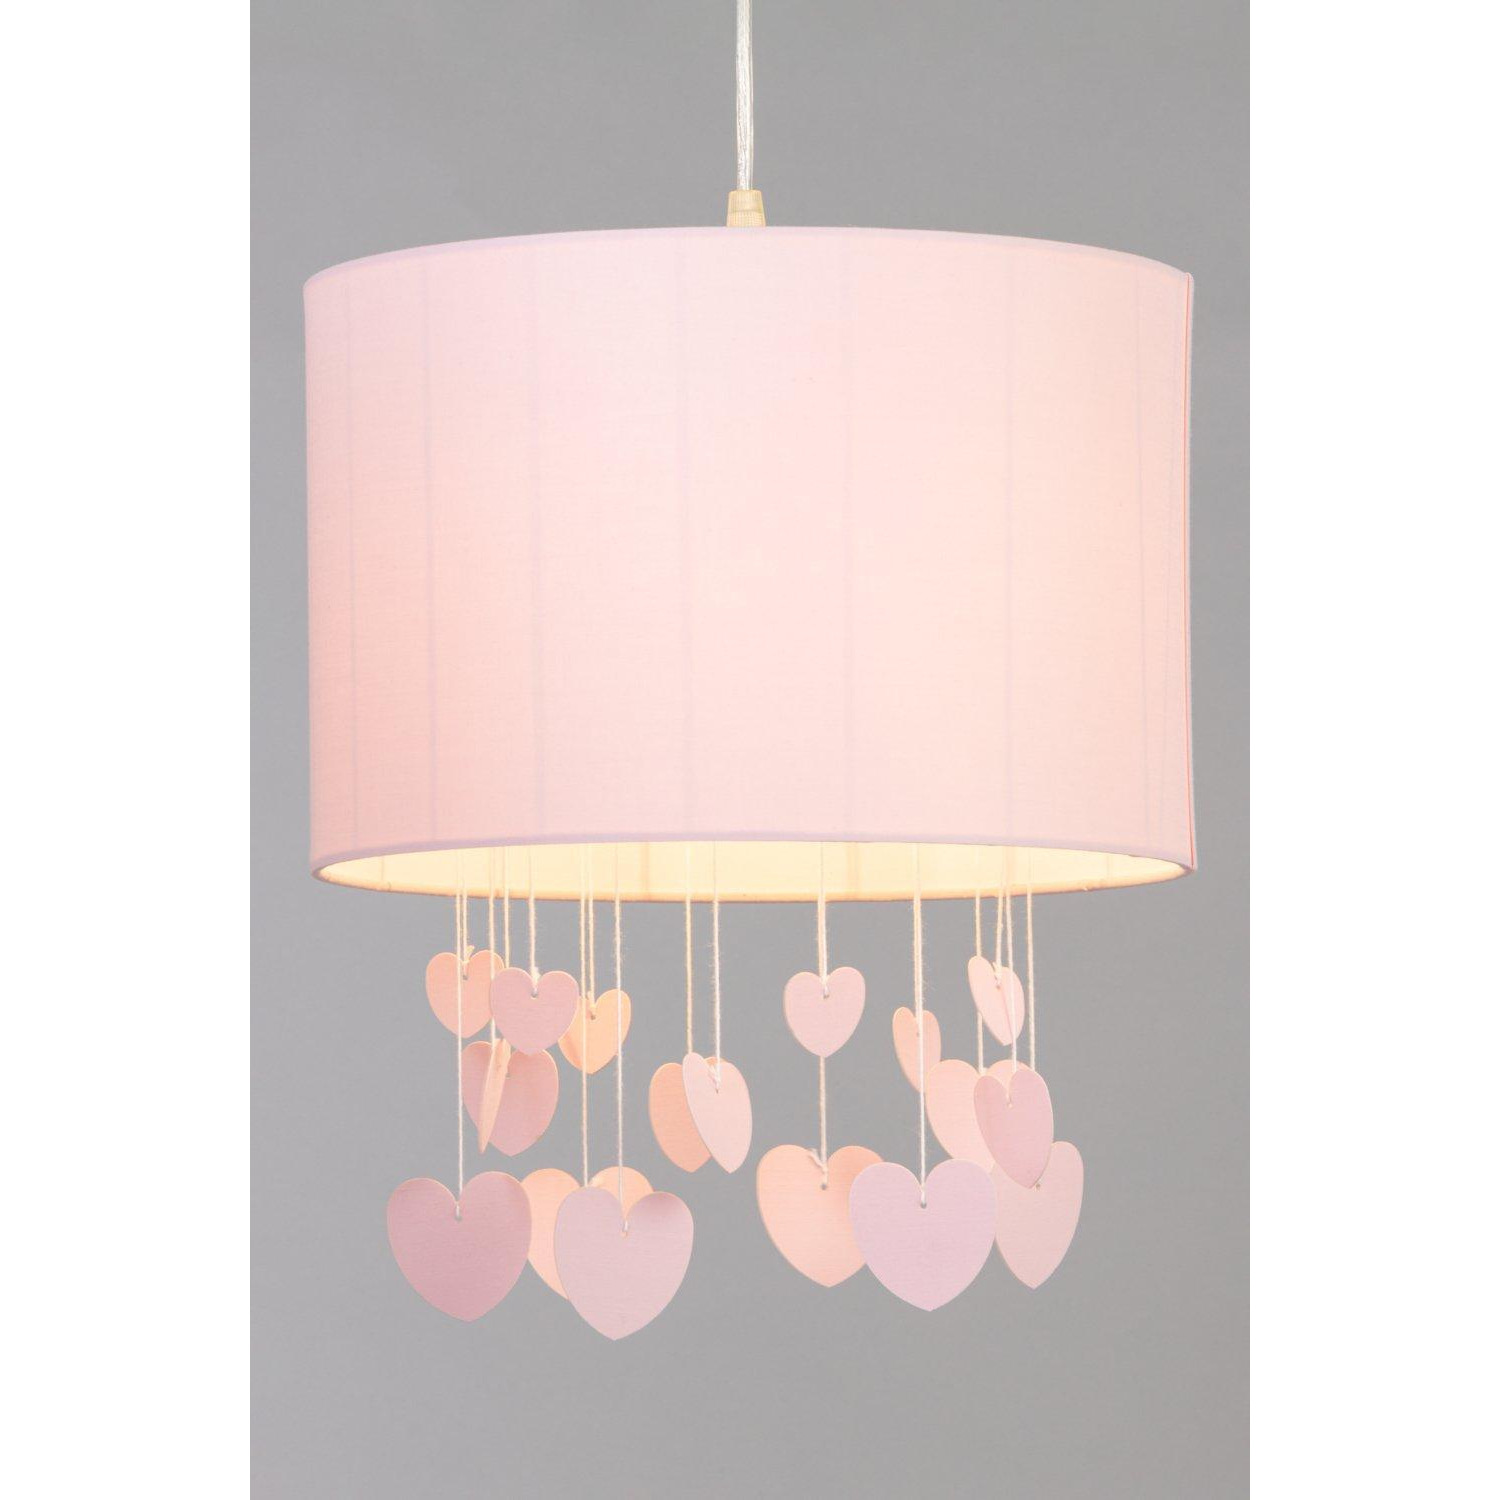 Glow Hearts Mobile Easy Fit Light Shade - image 1